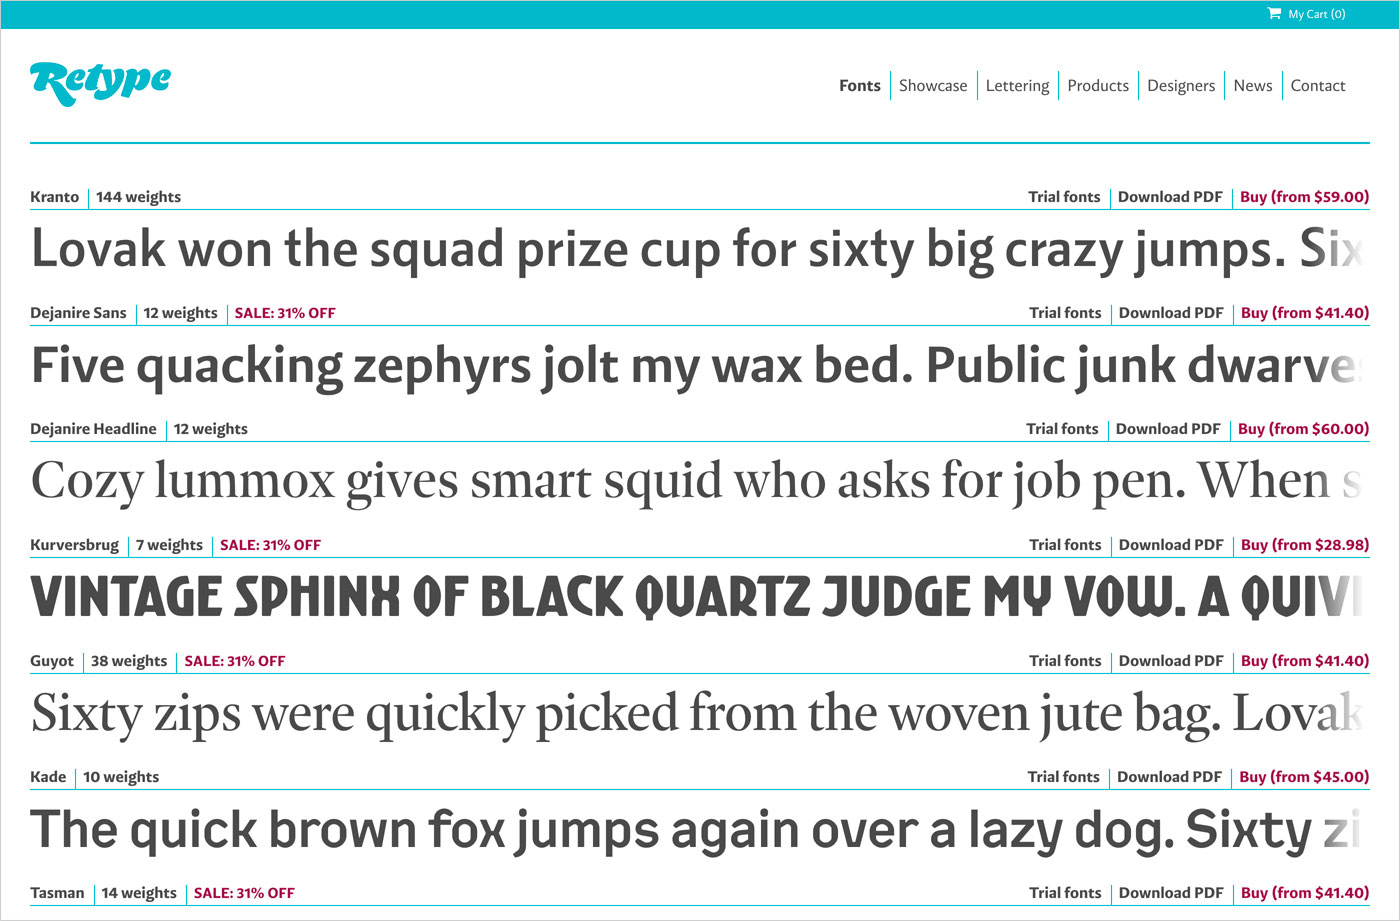 ReType Foundry | High quality fonts for print and webウェブサイトの画面キャプチャ画像